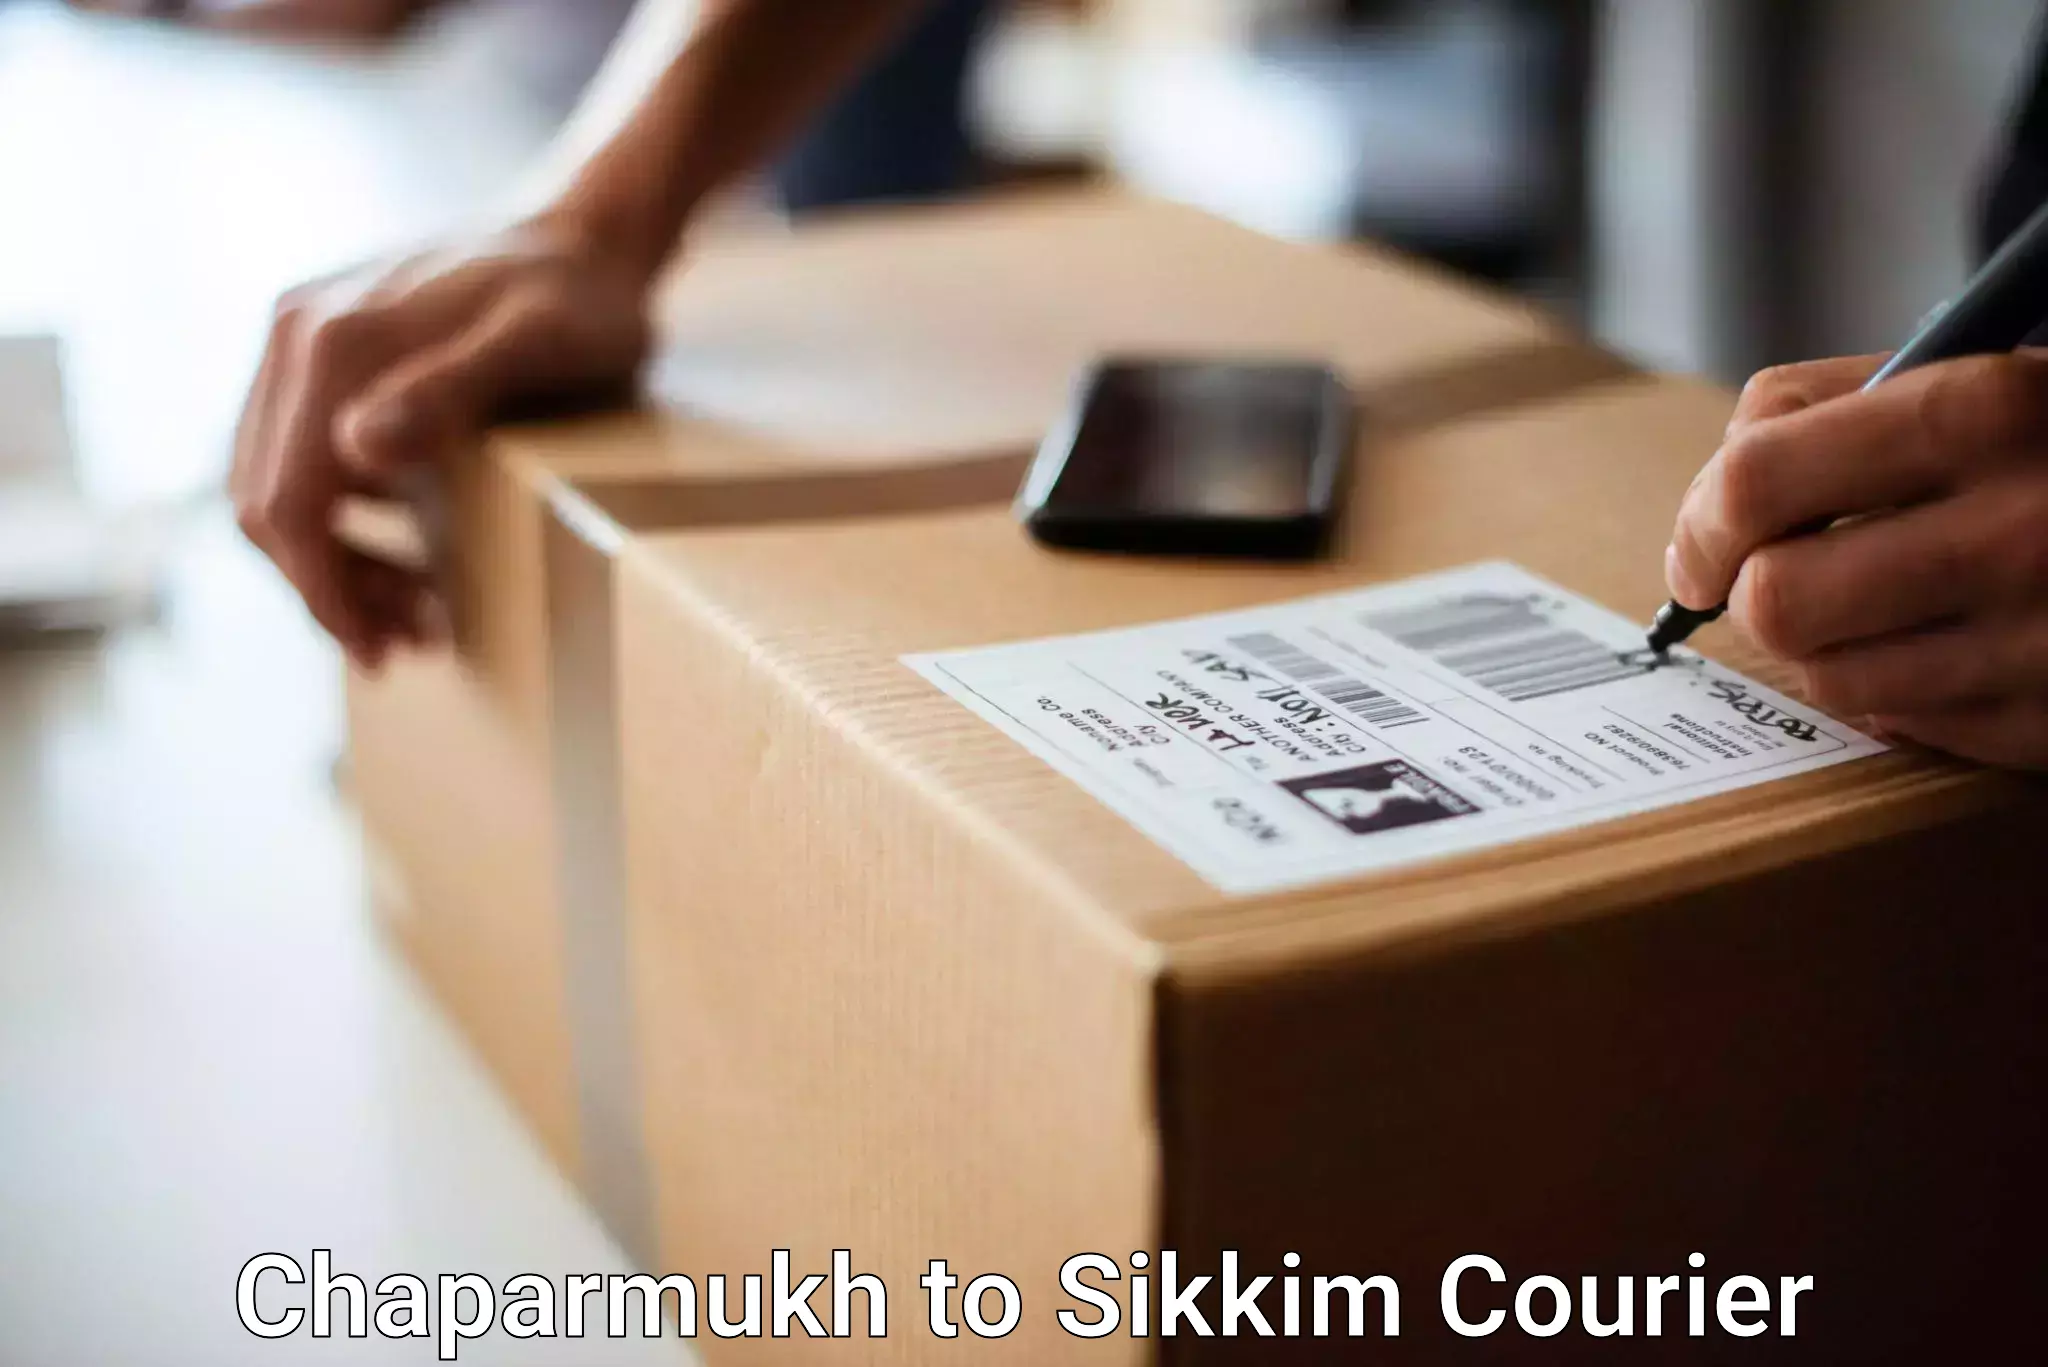 Baggage shipping service Chaparmukh to Sikkim